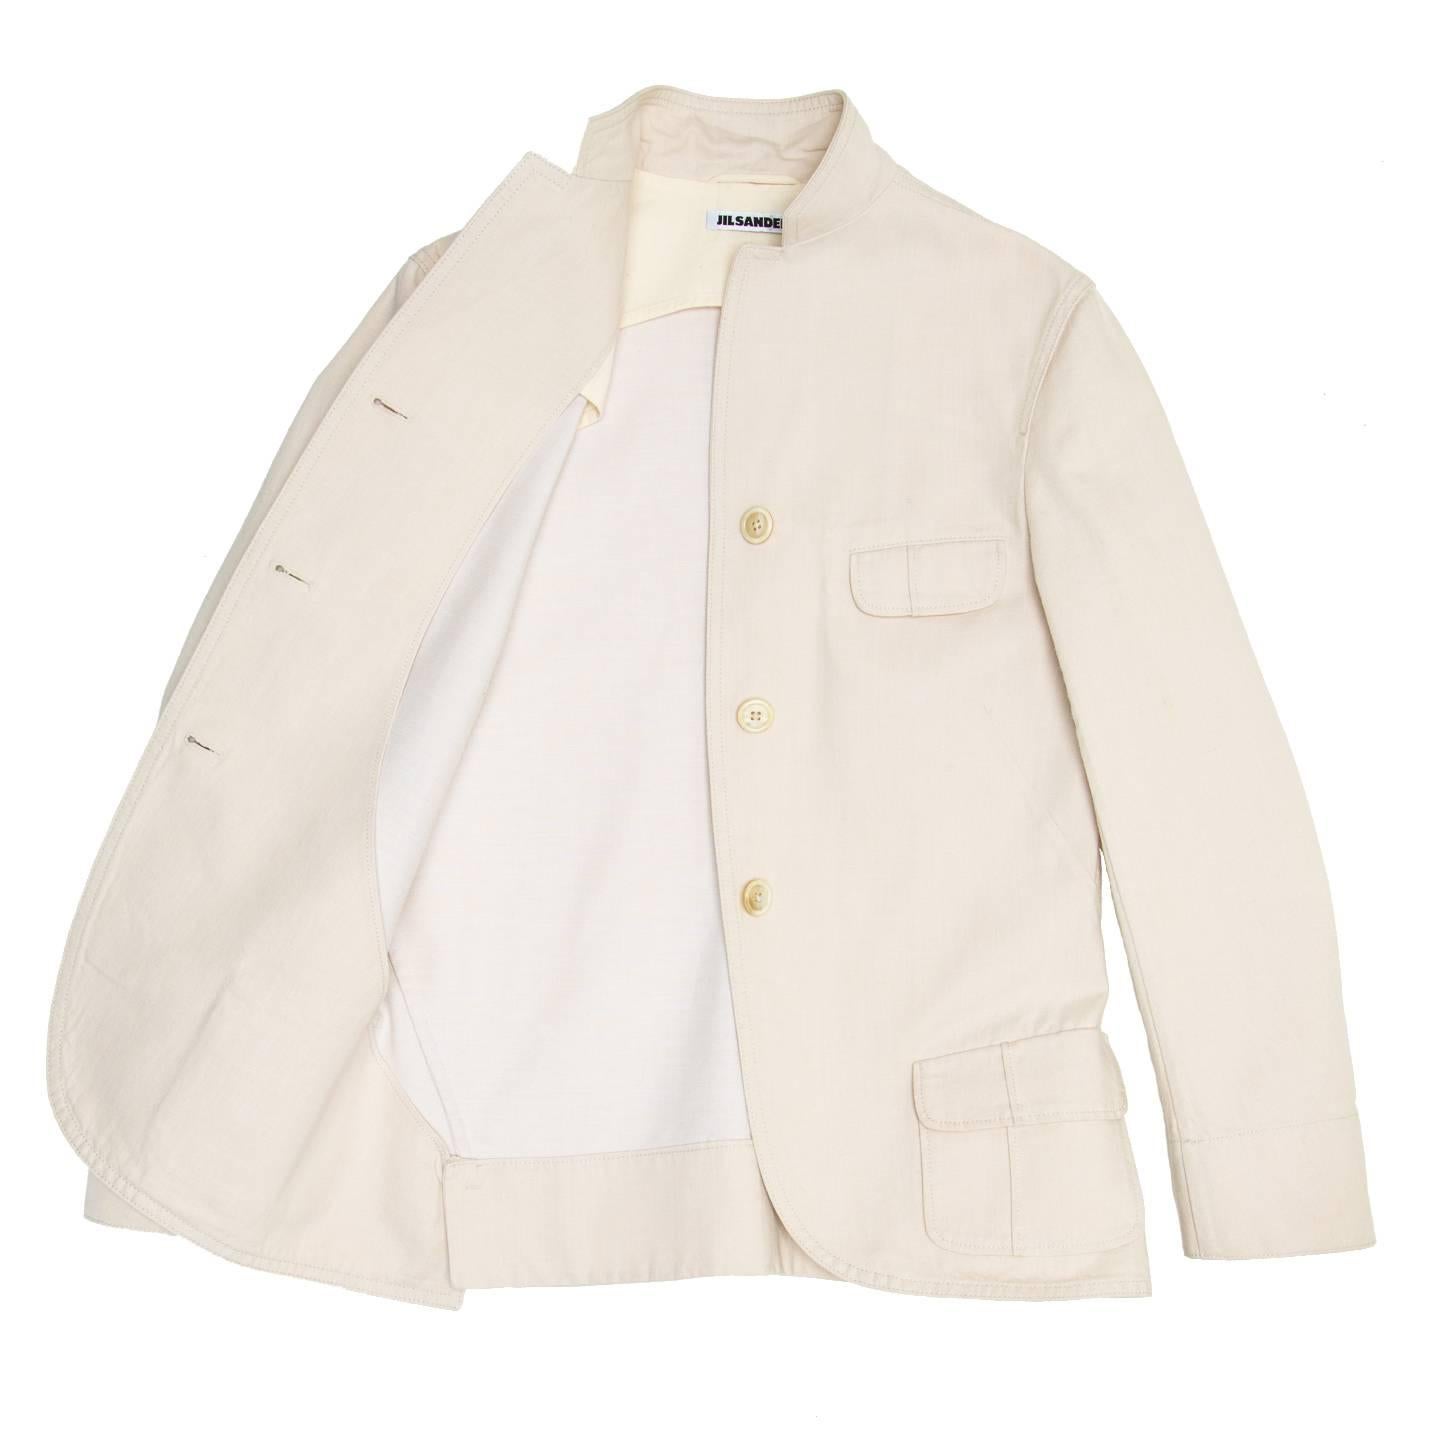 Jil Sander Ivory Cotton Blazer In New Condition For Sale In Brooklyn, NY